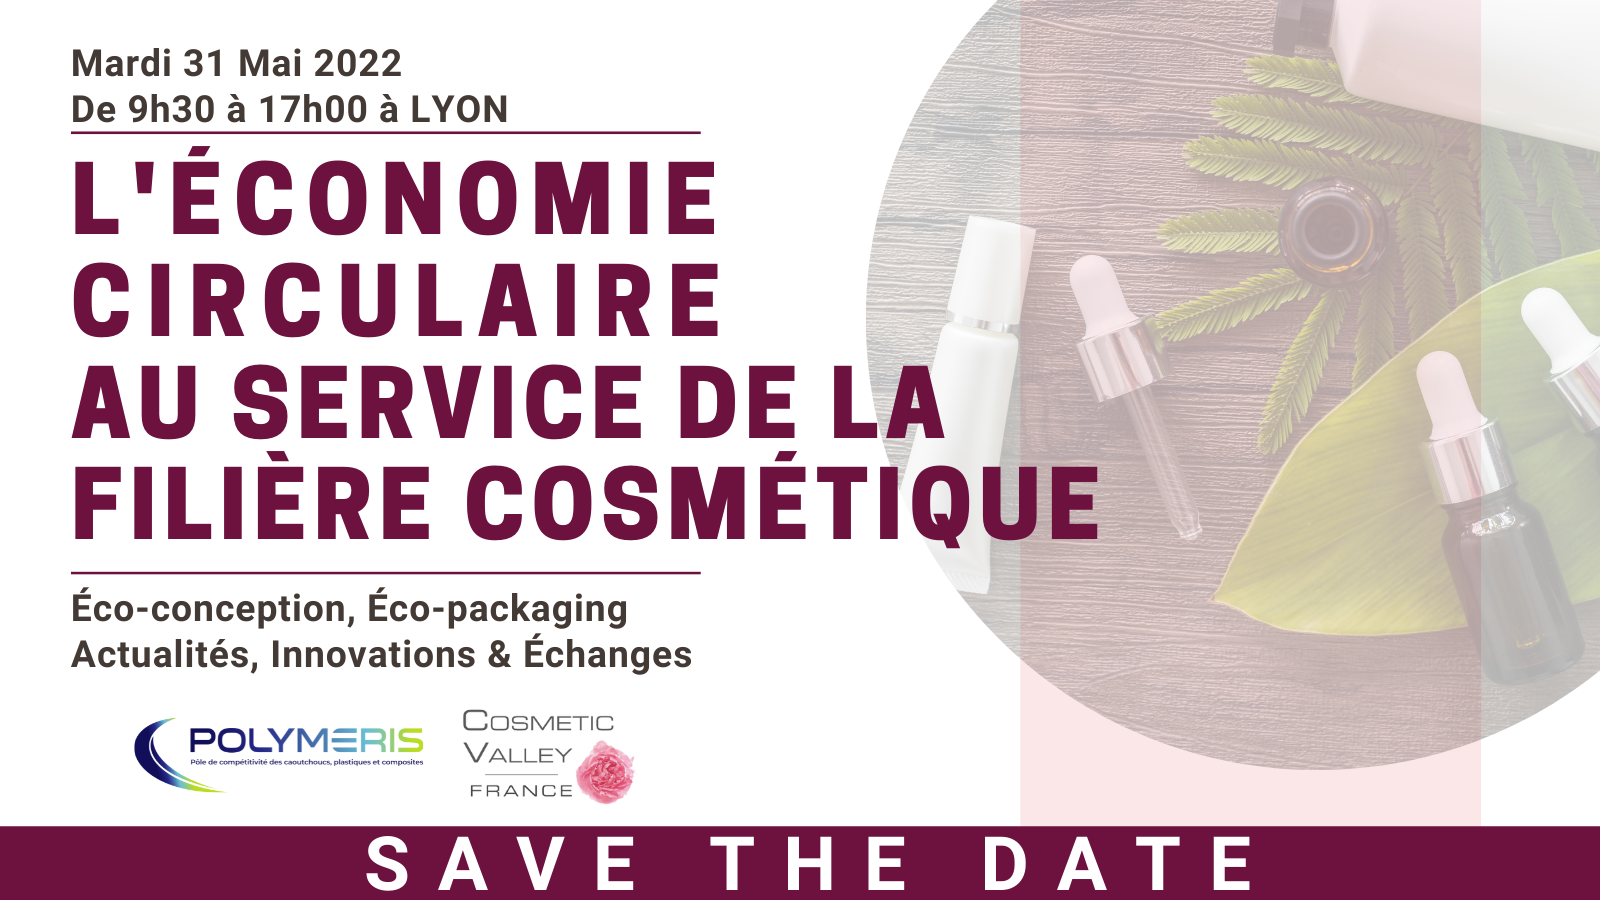 Leco circulaire filiere cosmetique SAVE THE DATE Twitter post